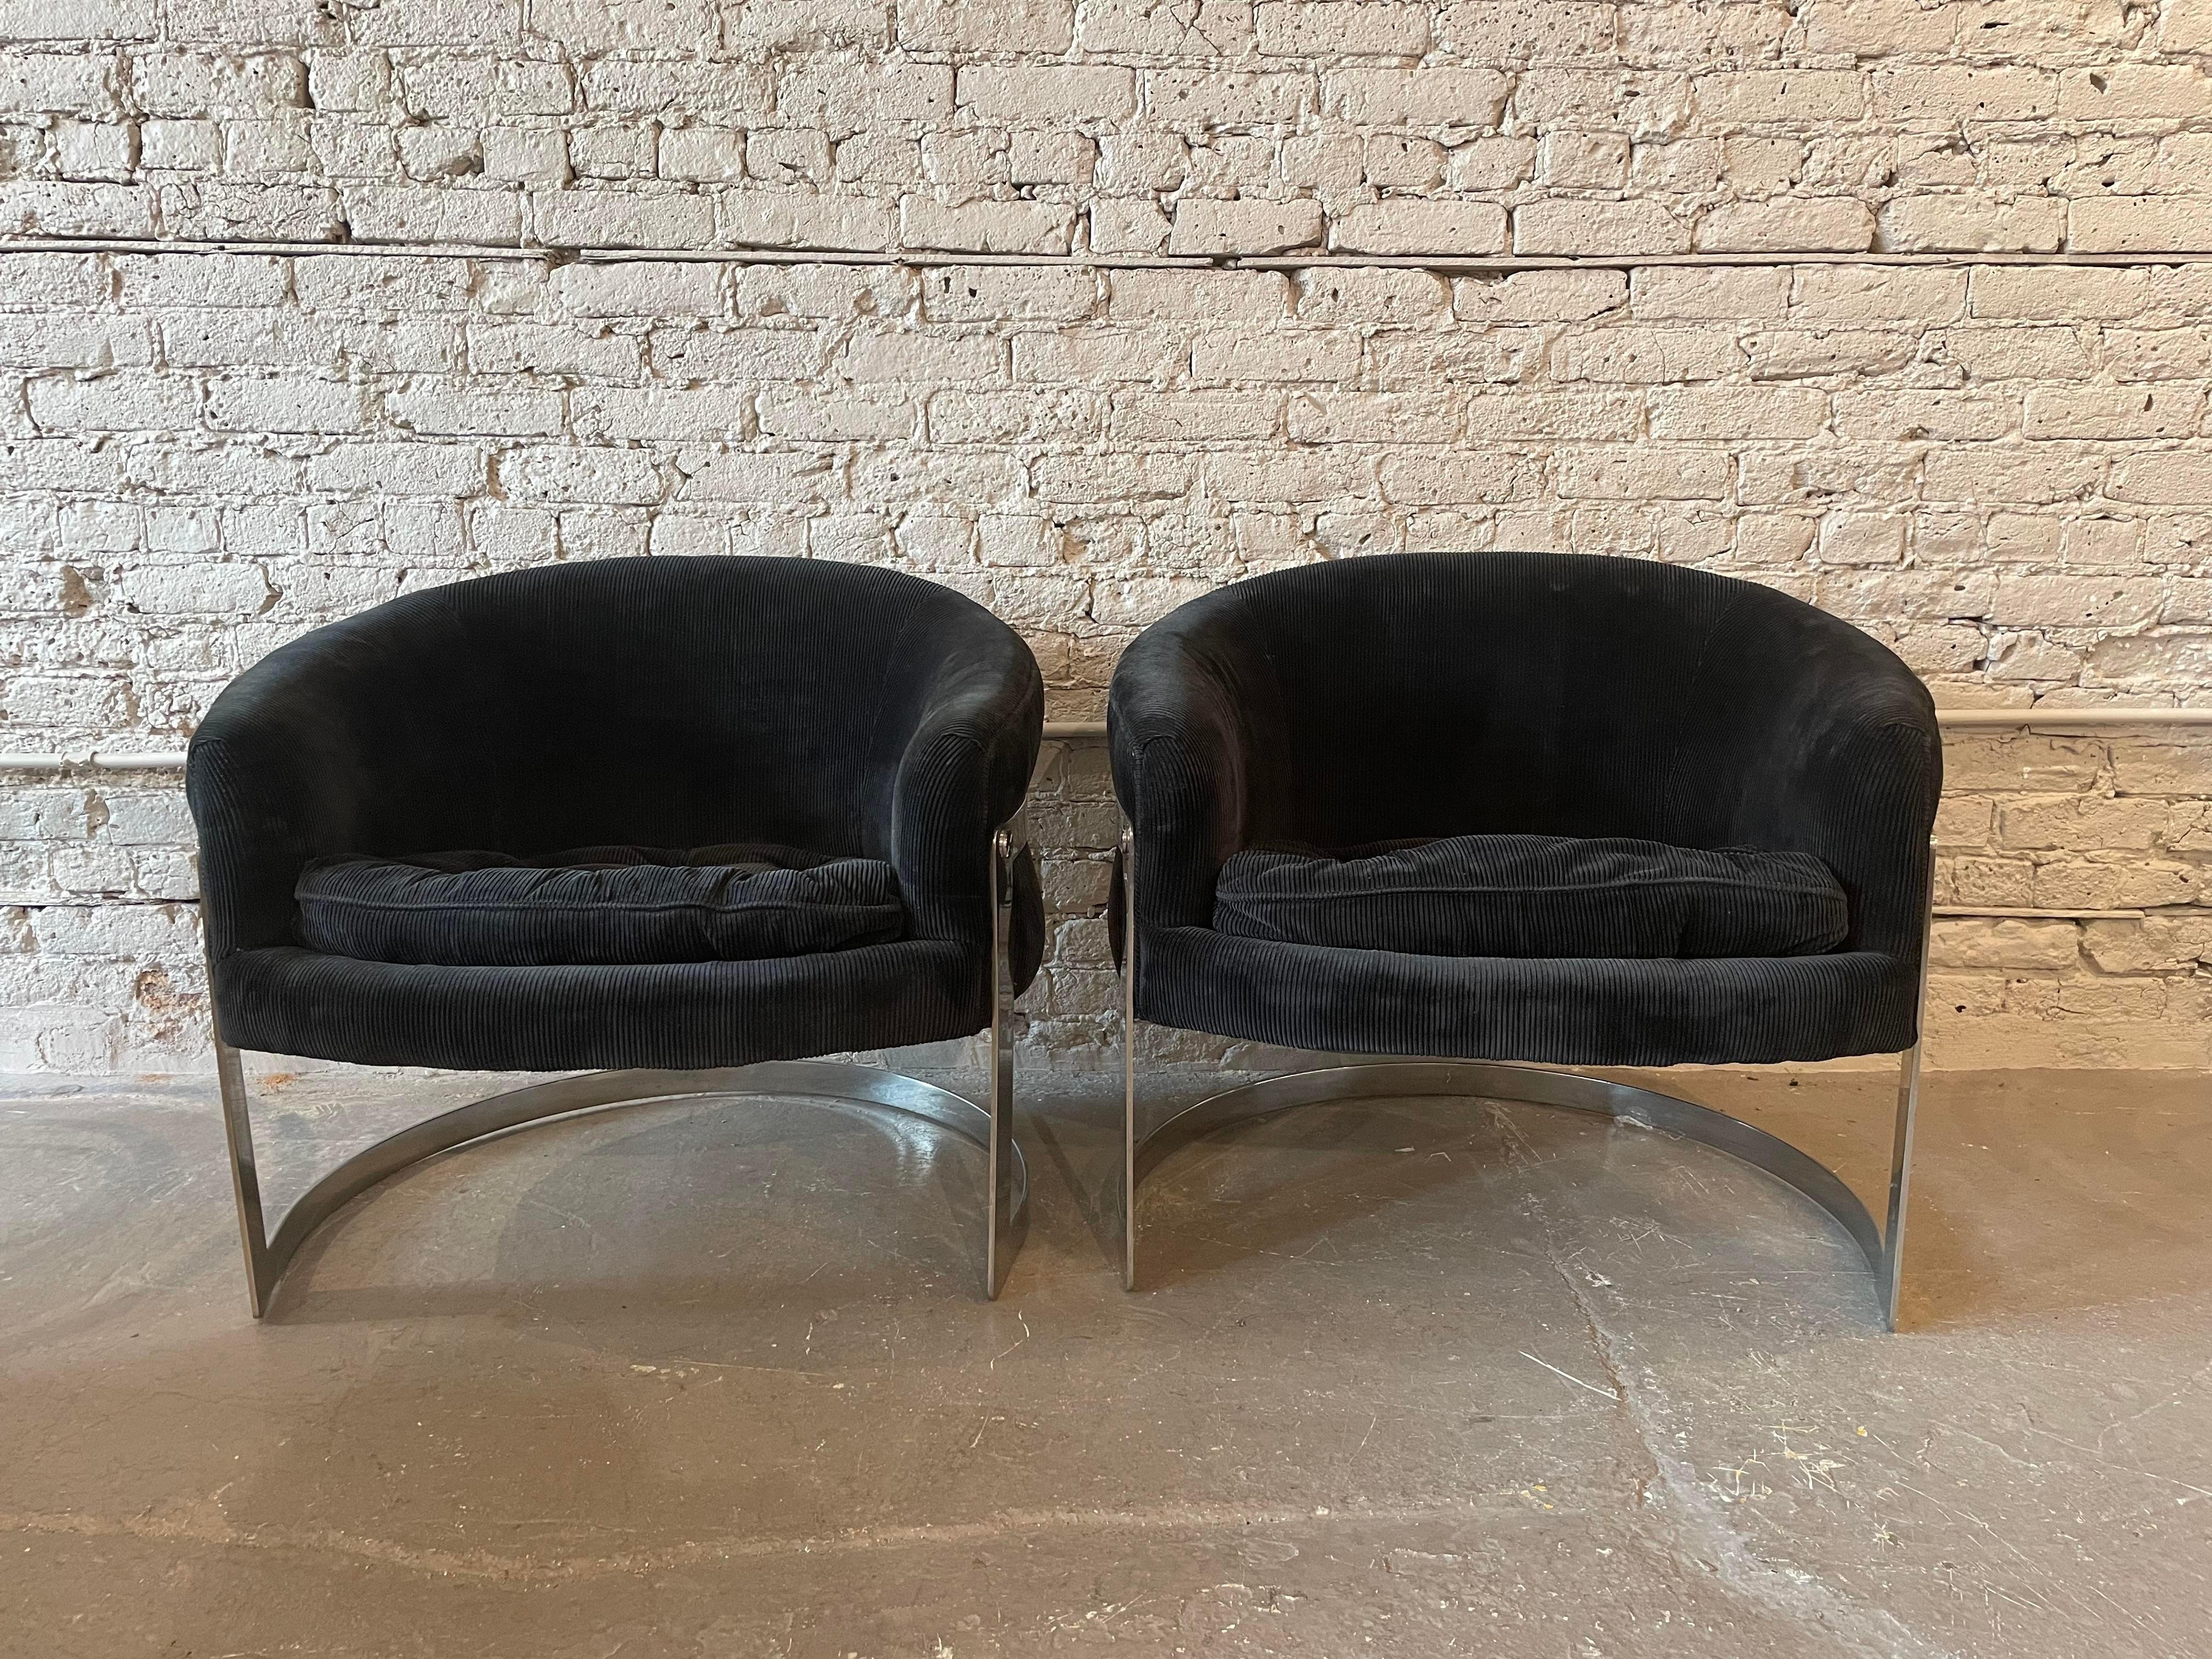 Oooh!!!! These chairs are it. The chrome is in excellent condition for being 50 years old. They are actually comfortable and usable as is (original upholstery). The perfect size for a small room without compromising comfort.
 